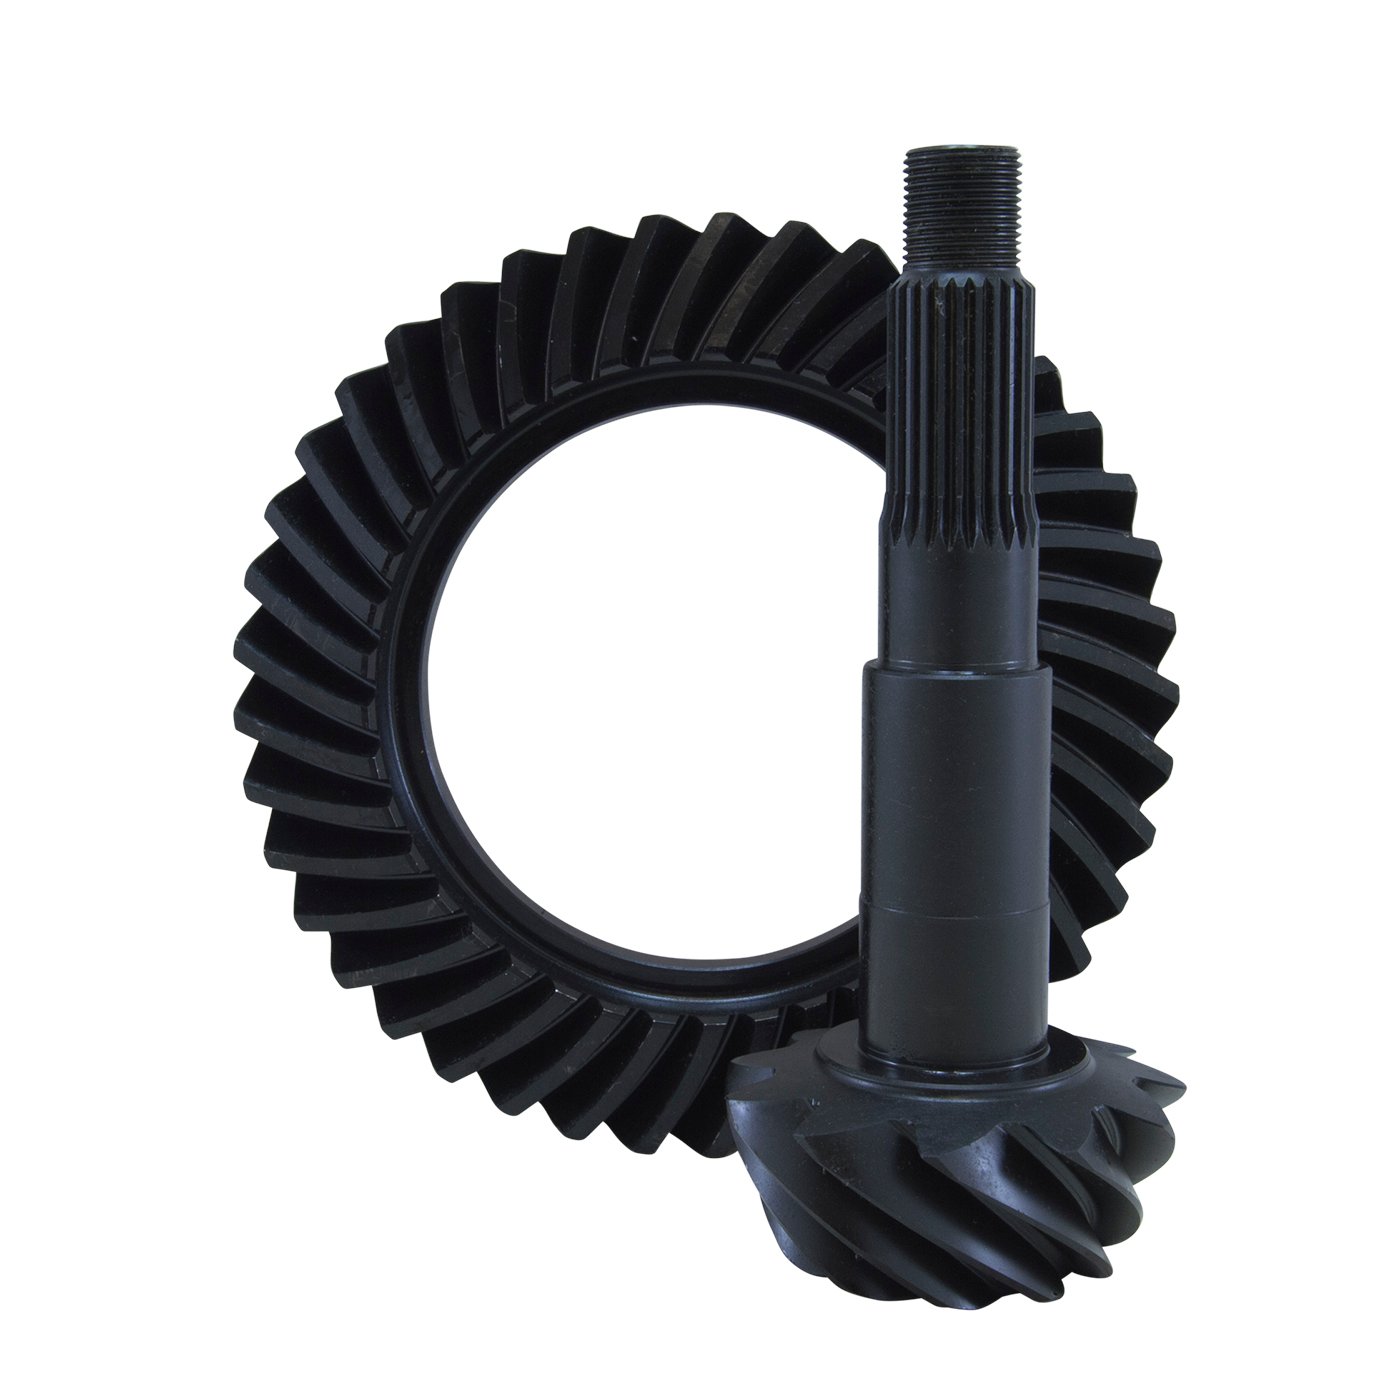 USA Standard 36171 Ring & Pinion in.Thick in. Gear Set, For GM 12 Bolt Car, 4.11 Ratio